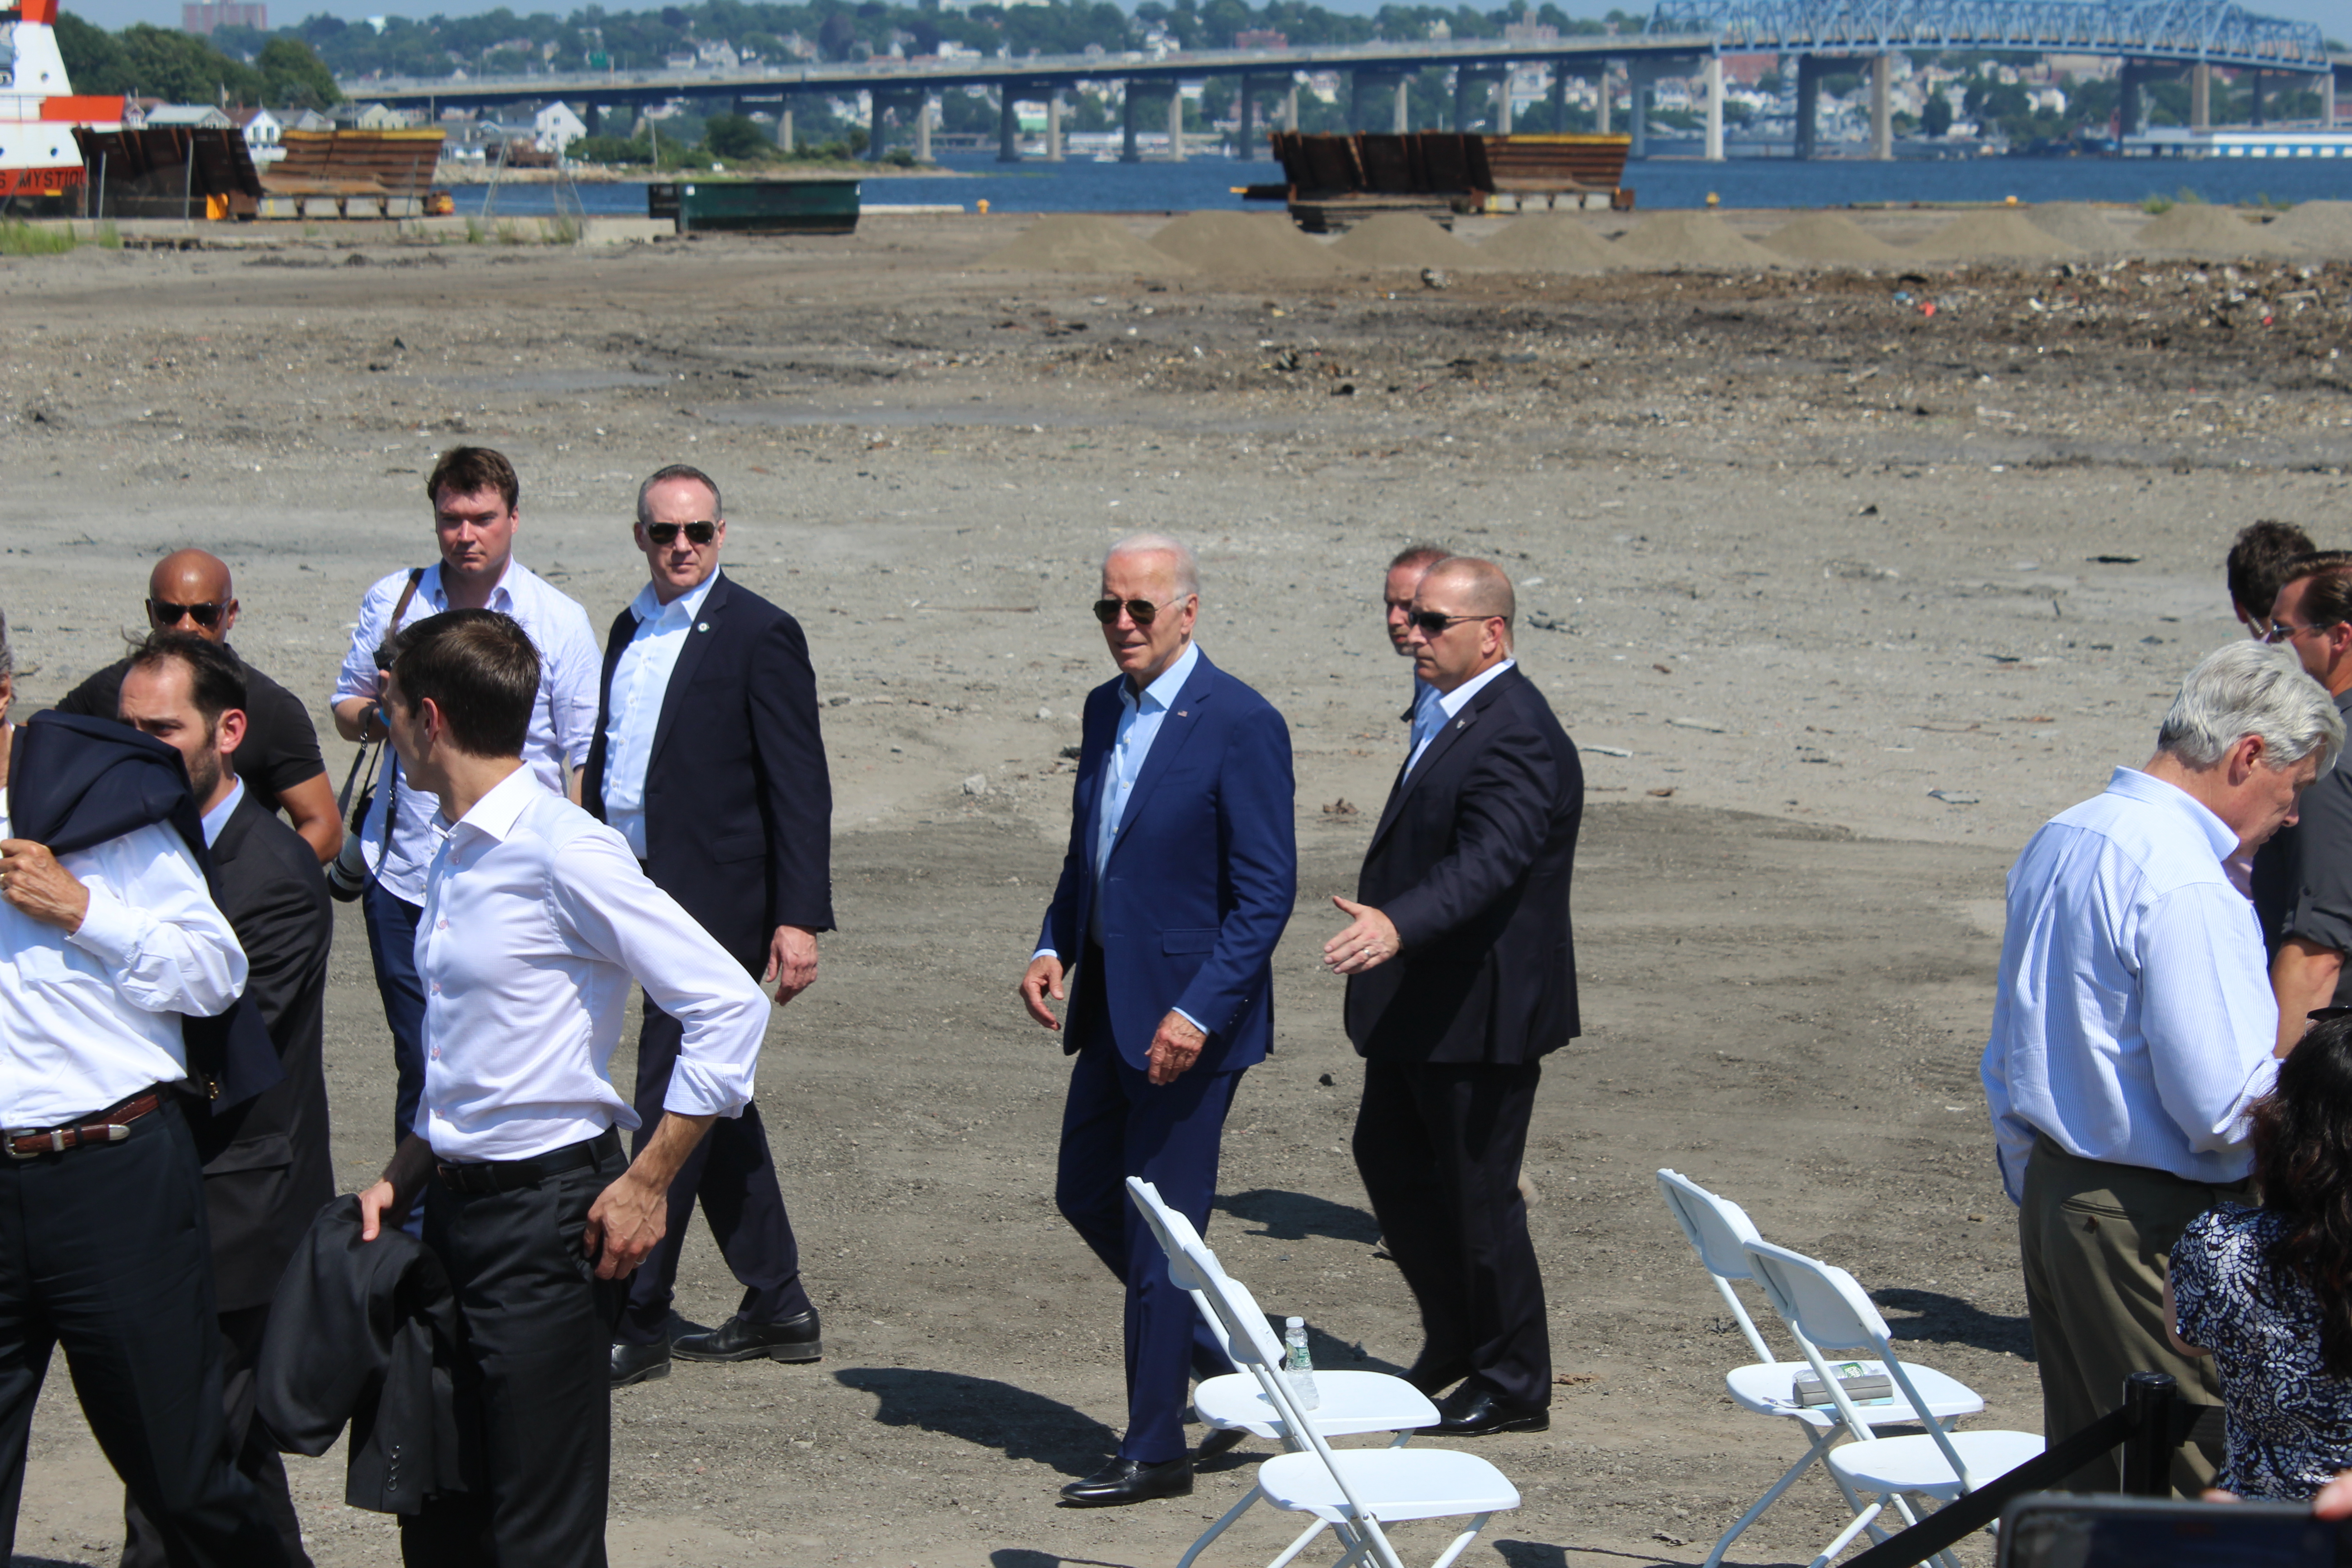 President Biden visited Brayton Point less than a week after negotiations for a major climate spending package fell apart.